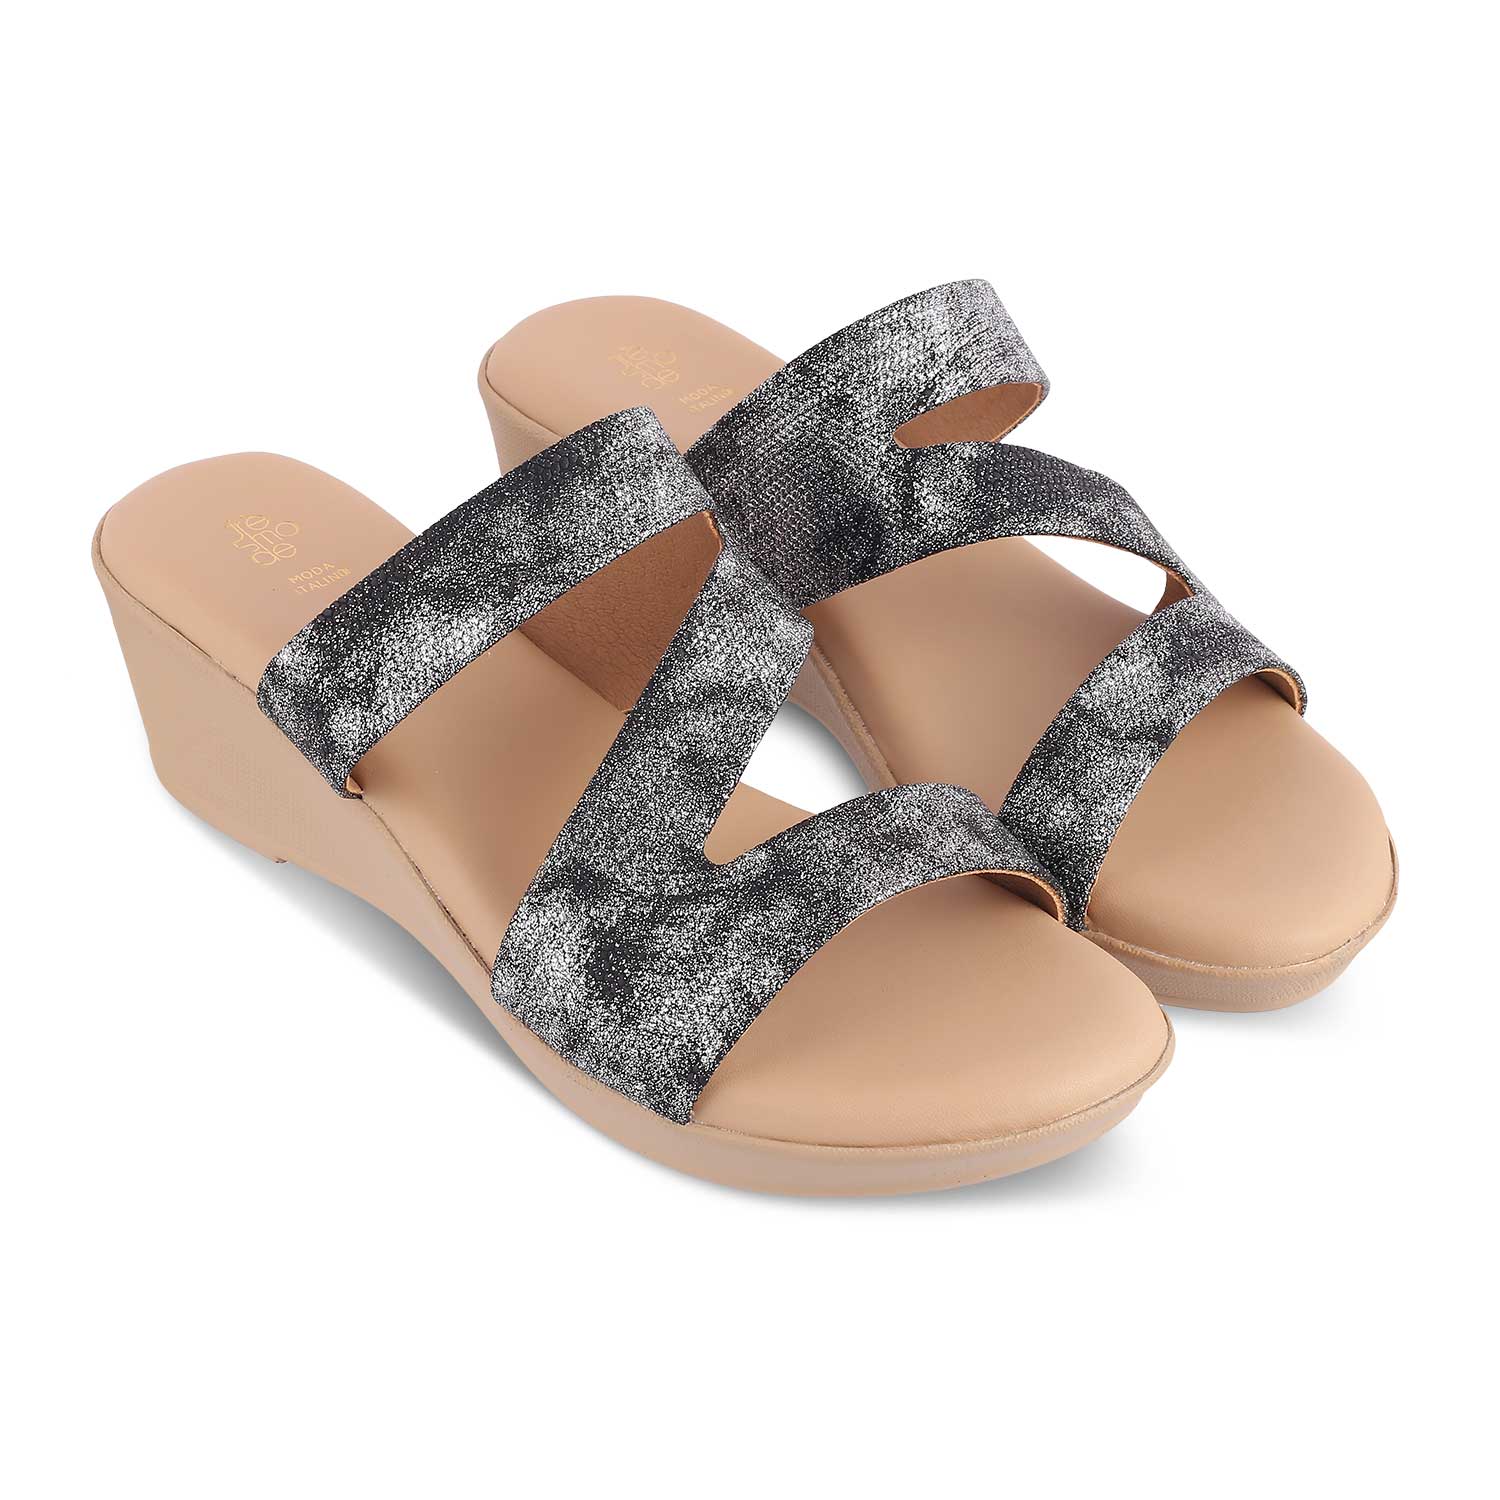 The Snike Pewter Women's Dress Wedge Sandals Tresmode